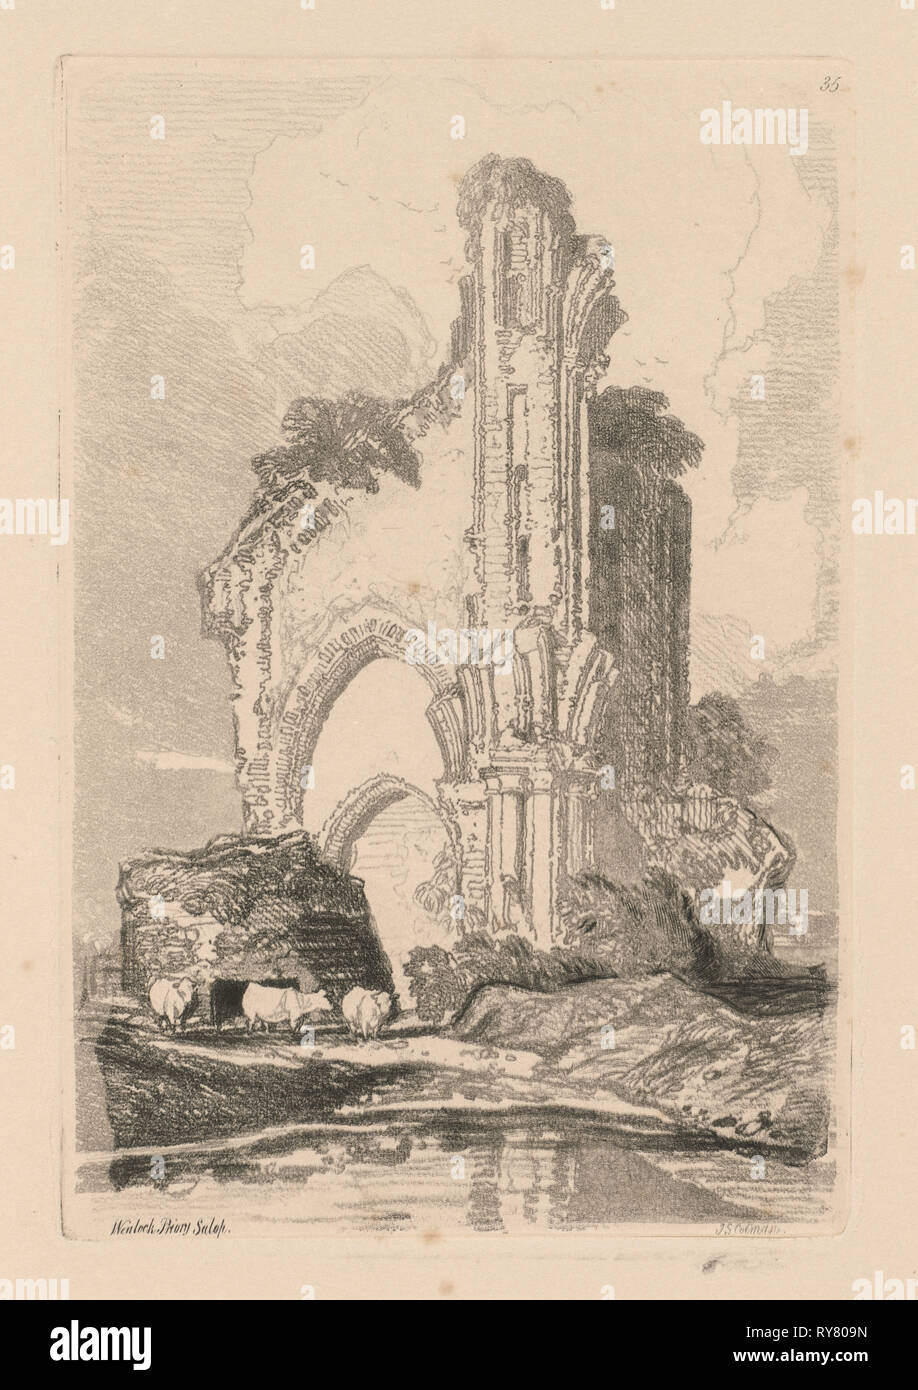 Liber Studiorum: Plate 35, Wenlock Priory, Salop, 1838. John Sell Cotman (British, 1782-1842). Softground etching, from a bound volume containing 48 plates; sheet: 49.5 x 32 cm (19 1/2 x 12 5/8 in.); platemark: 18.6 x 12.5 cm (7 5/16 x 4 15/16 in Stock Photo